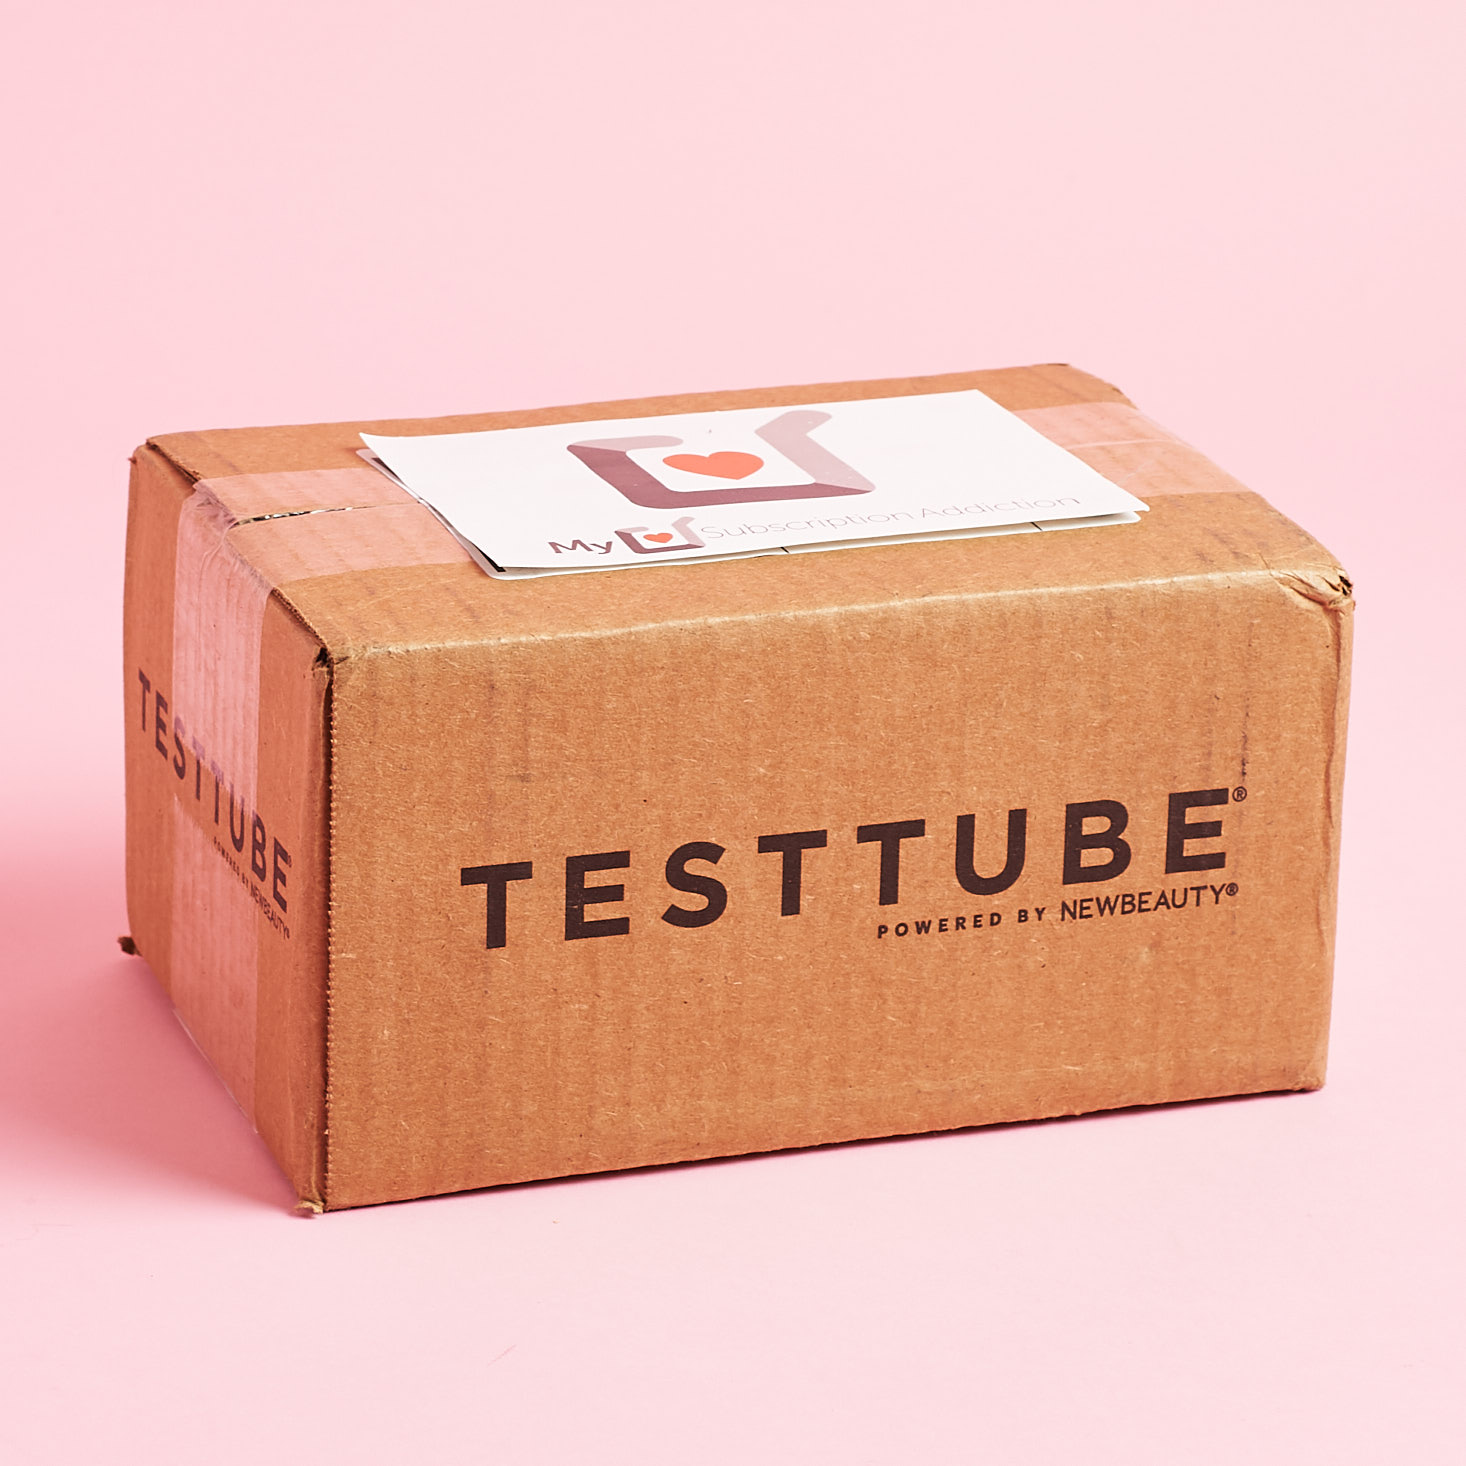 NewBeauty TestTube Subscription Review – March/April 2019